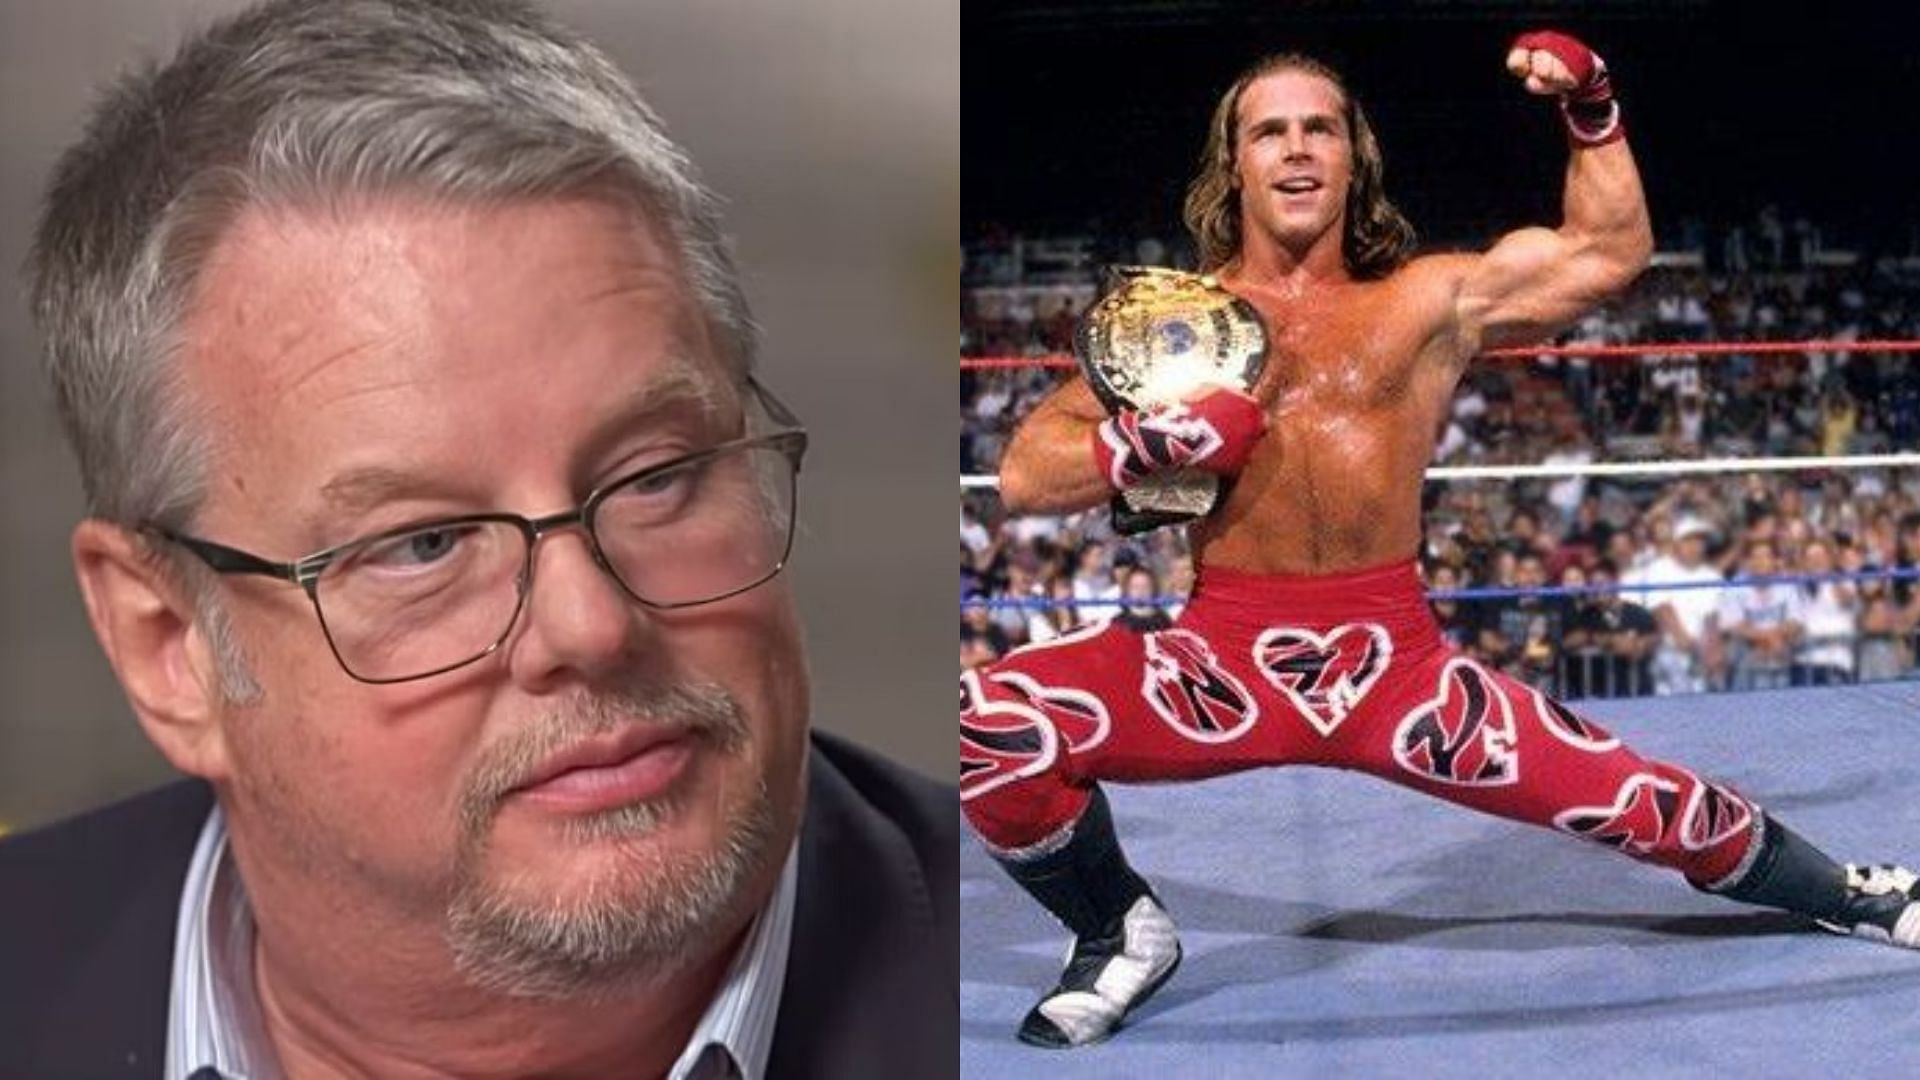 Bruce Prichard and Shawn Michaels are both staples of WWE